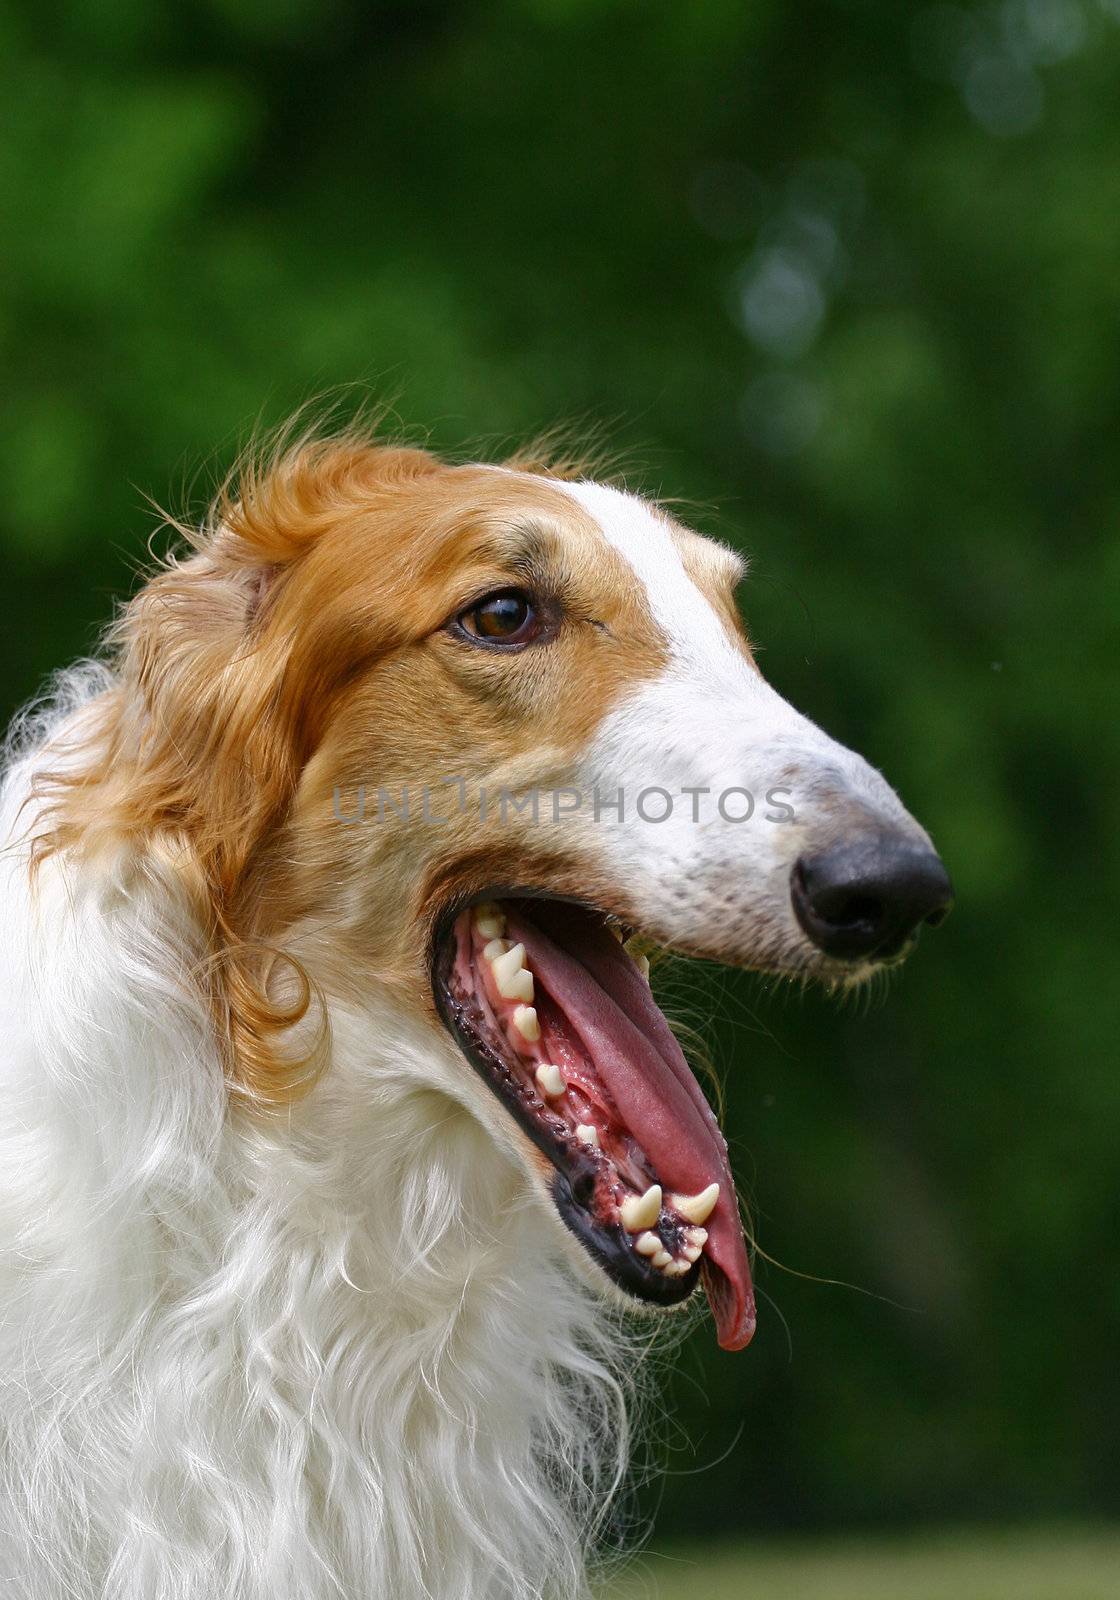 The Borzoi is a breed of domestic dog (Canis lupus familiaris) also called the Russian Wolfhound and brought to Russia from Middle-Asian countries. Having medium-length and slightly curly hair, it is similar in shape to Greyhounds, and is a member of the sighthound family.